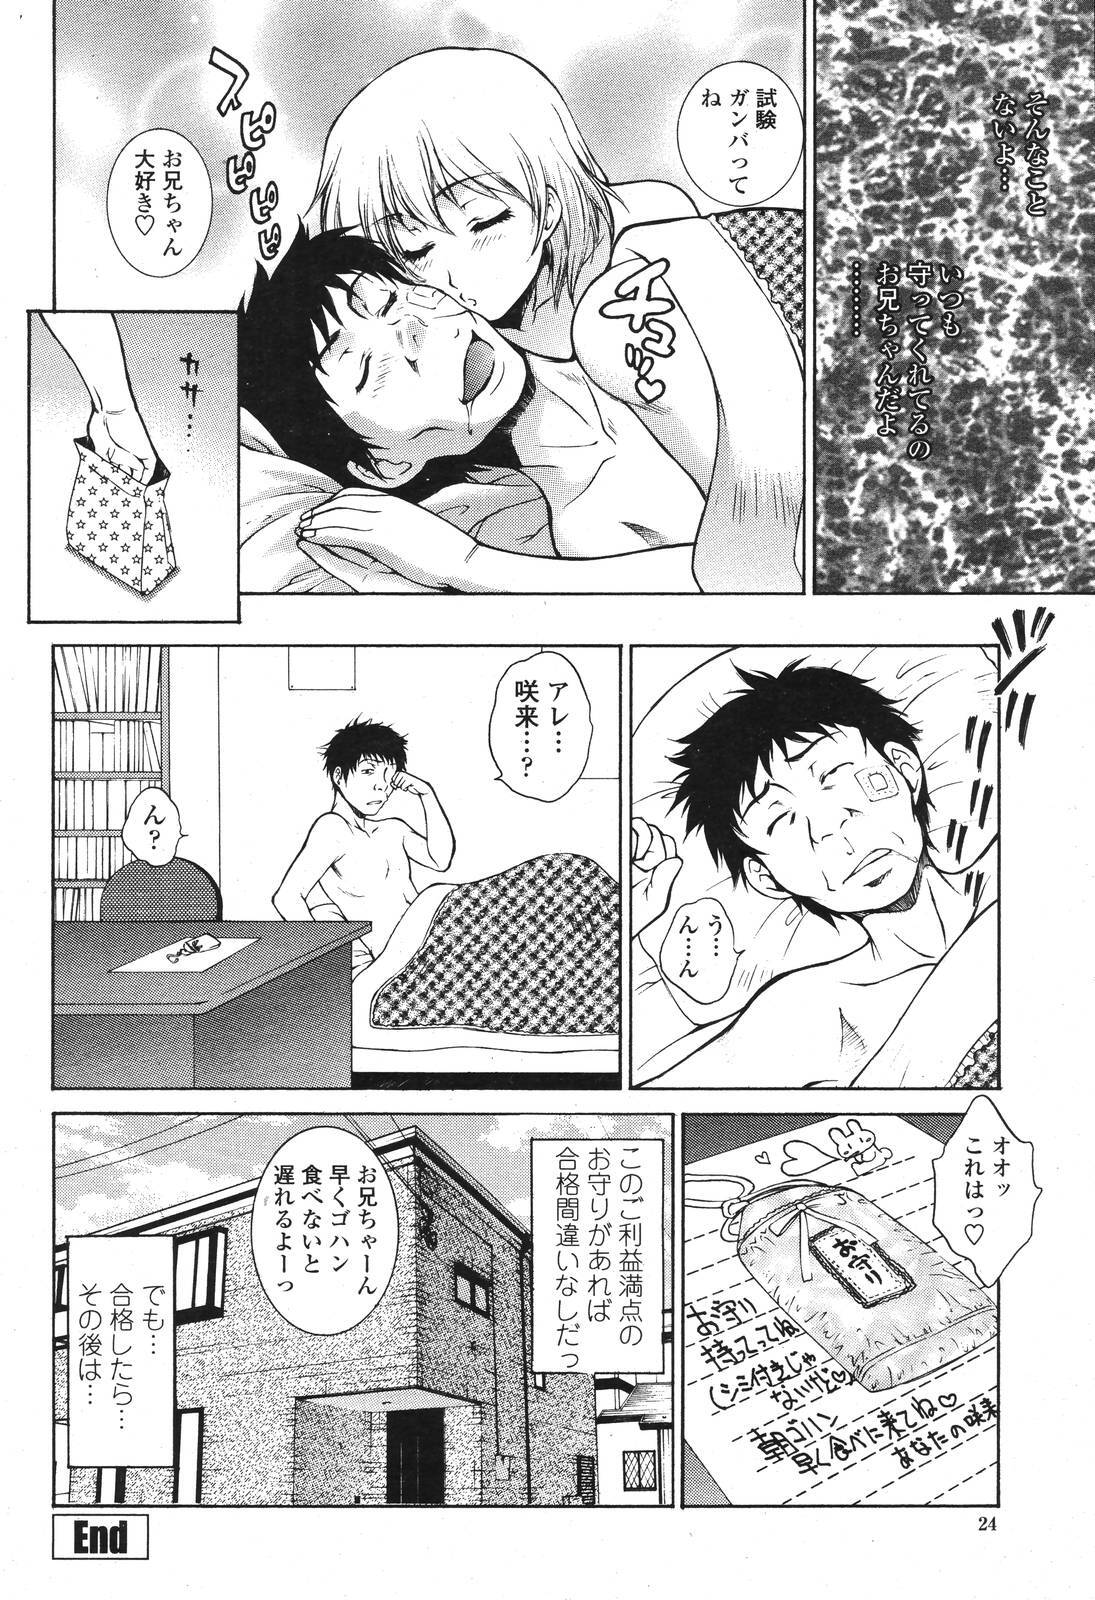 COMIC Momohime 2006-10 page 26 full